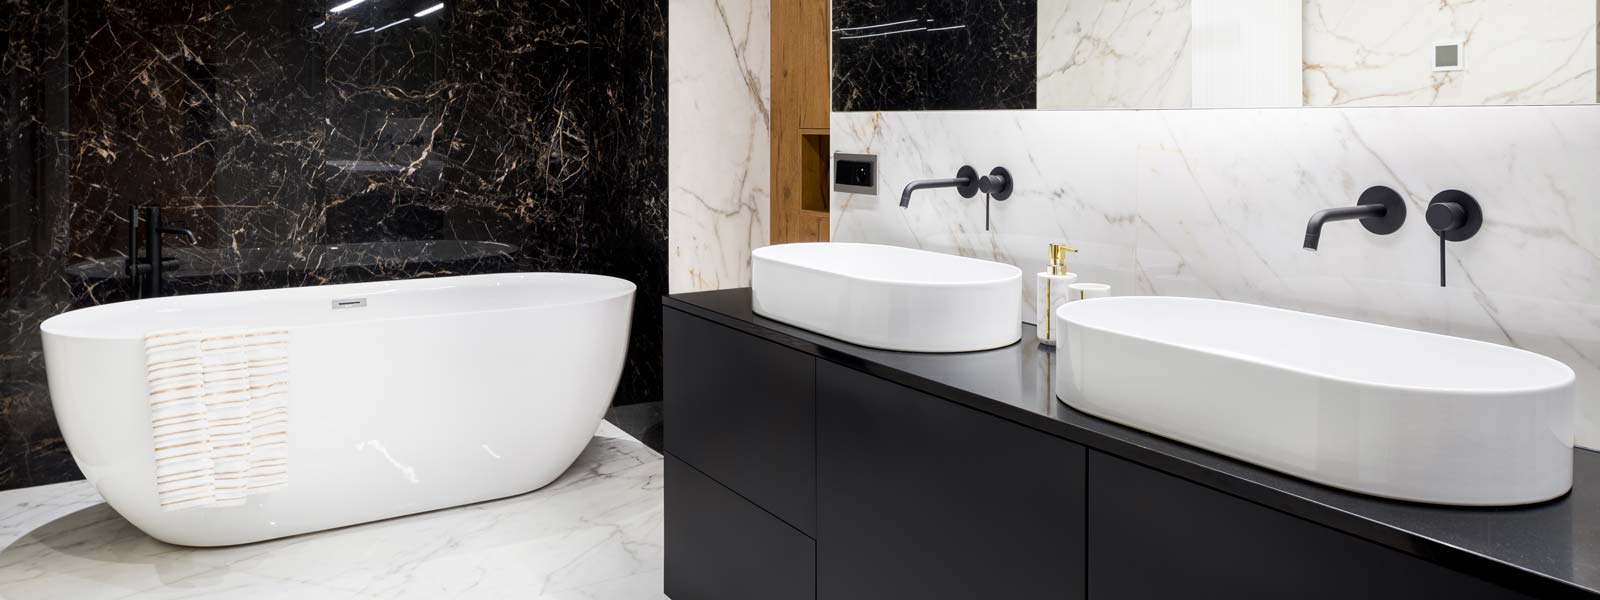 Chic modern bathrooms by Solihull Heating and bathrooms (SHB) Ltd